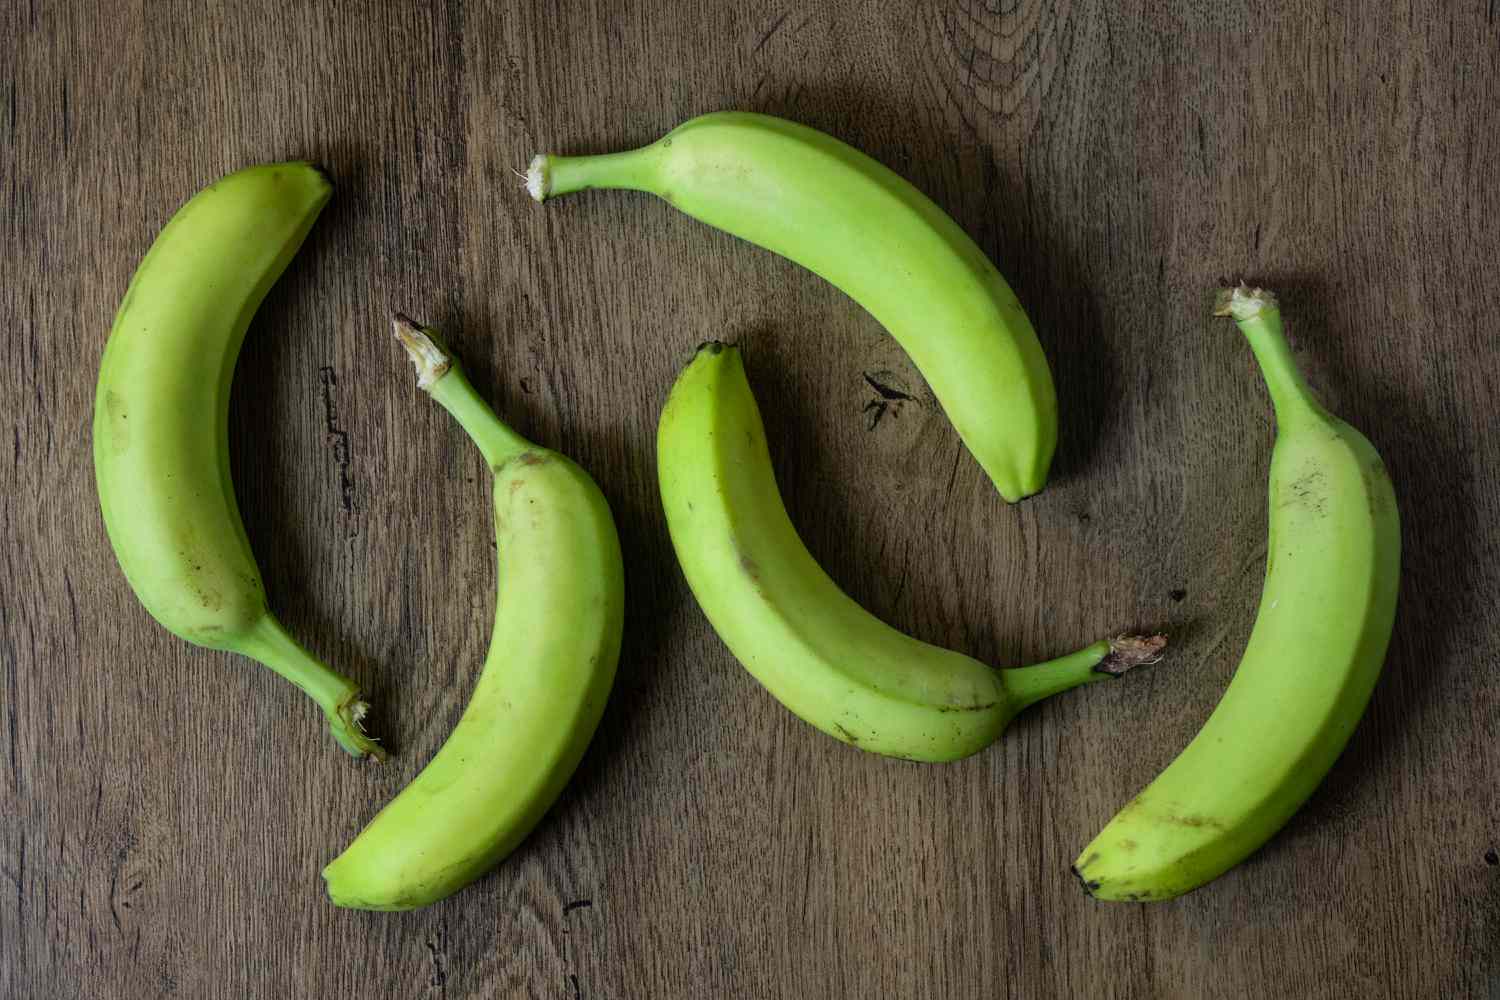 how-to-boil-green-bananas-puerto-rican-style